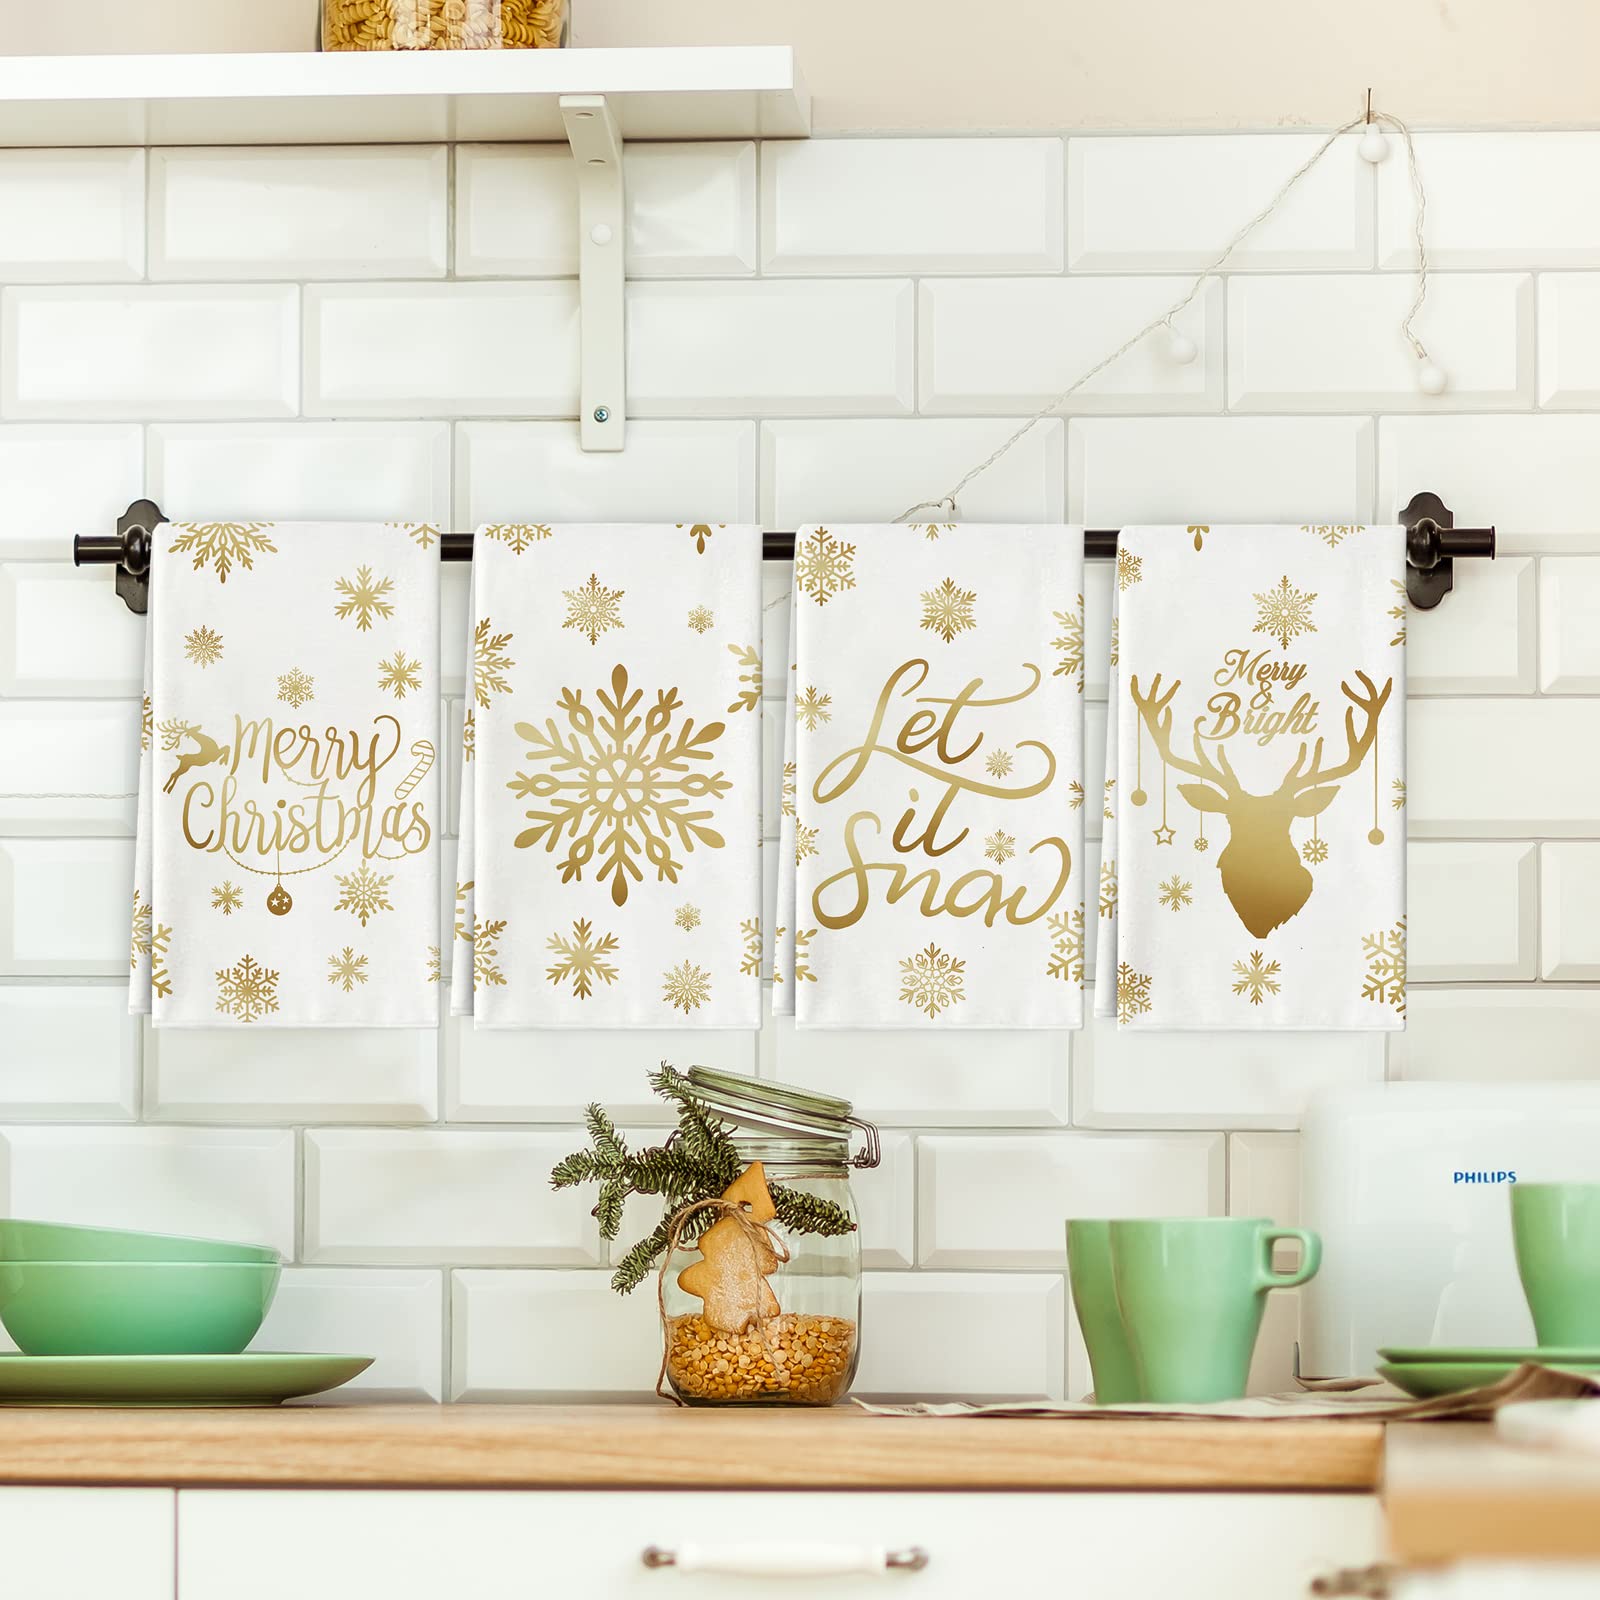 AnyDesign Christmas Kitchen Towel Gold Snowflake Reindeer Dish Towel 18 x 28 Inch Let It Snow Hand Drying Tea Towel for Cooking Baking, Set of 4